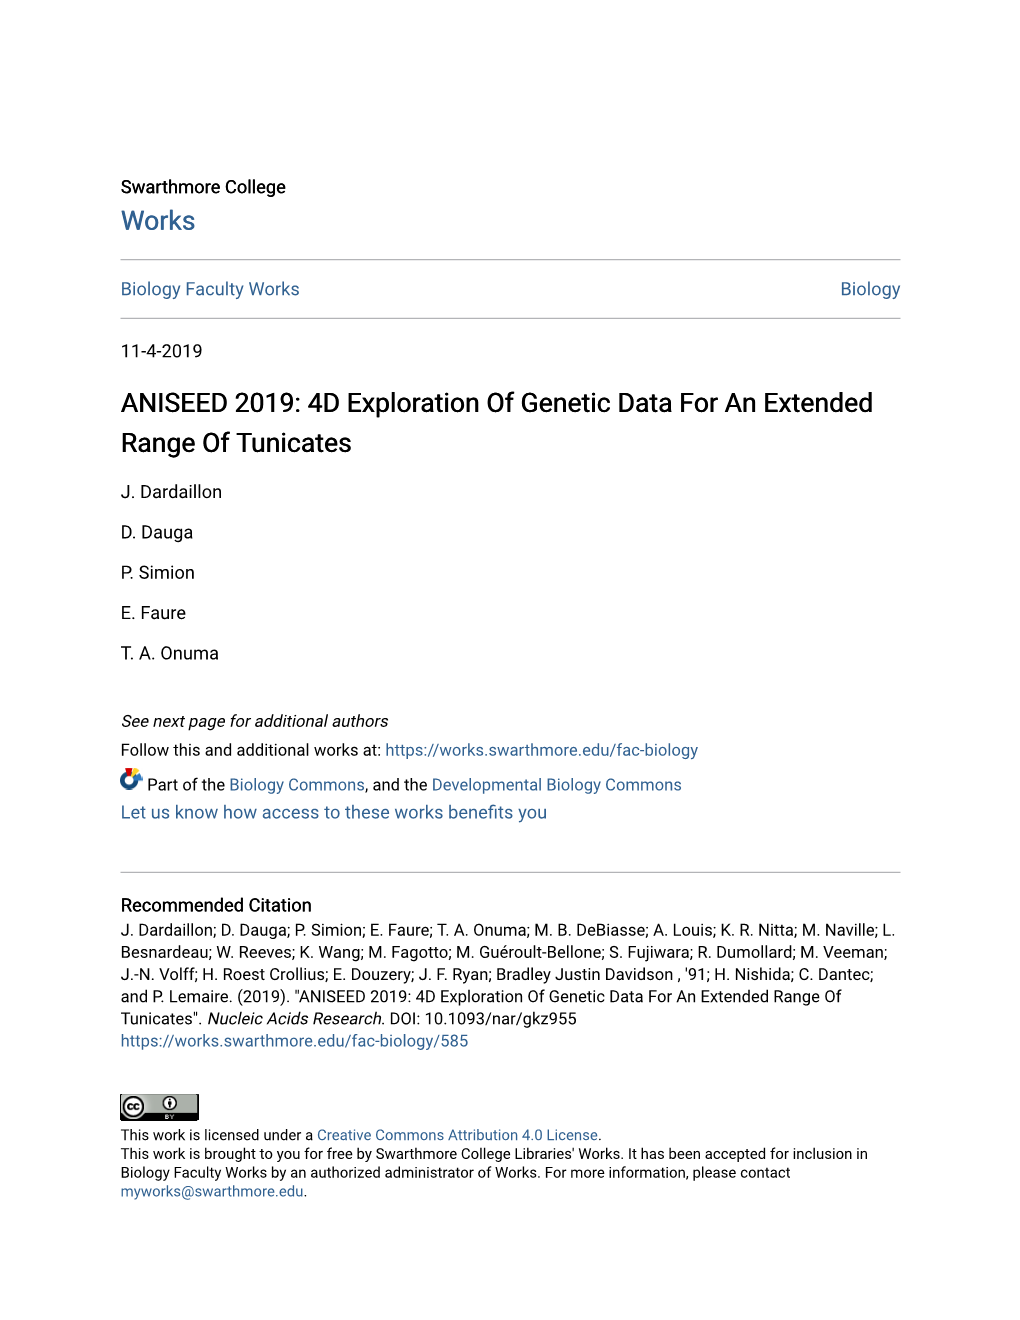 4D Exploration of Genetic Data for an Extended Range of Tunicates